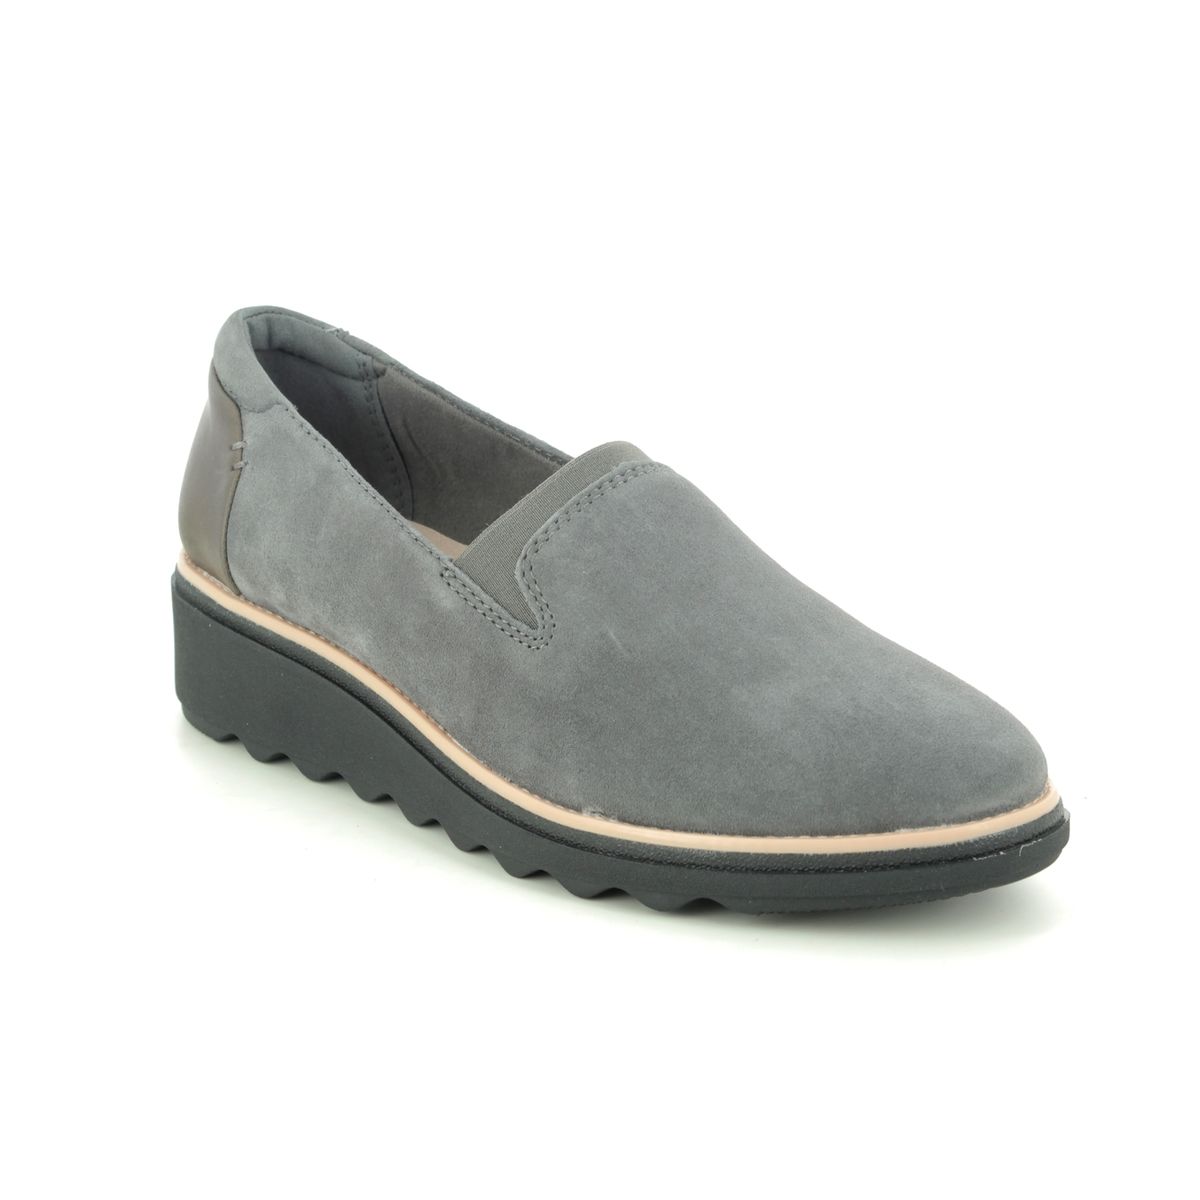 grey suede wedge shoes